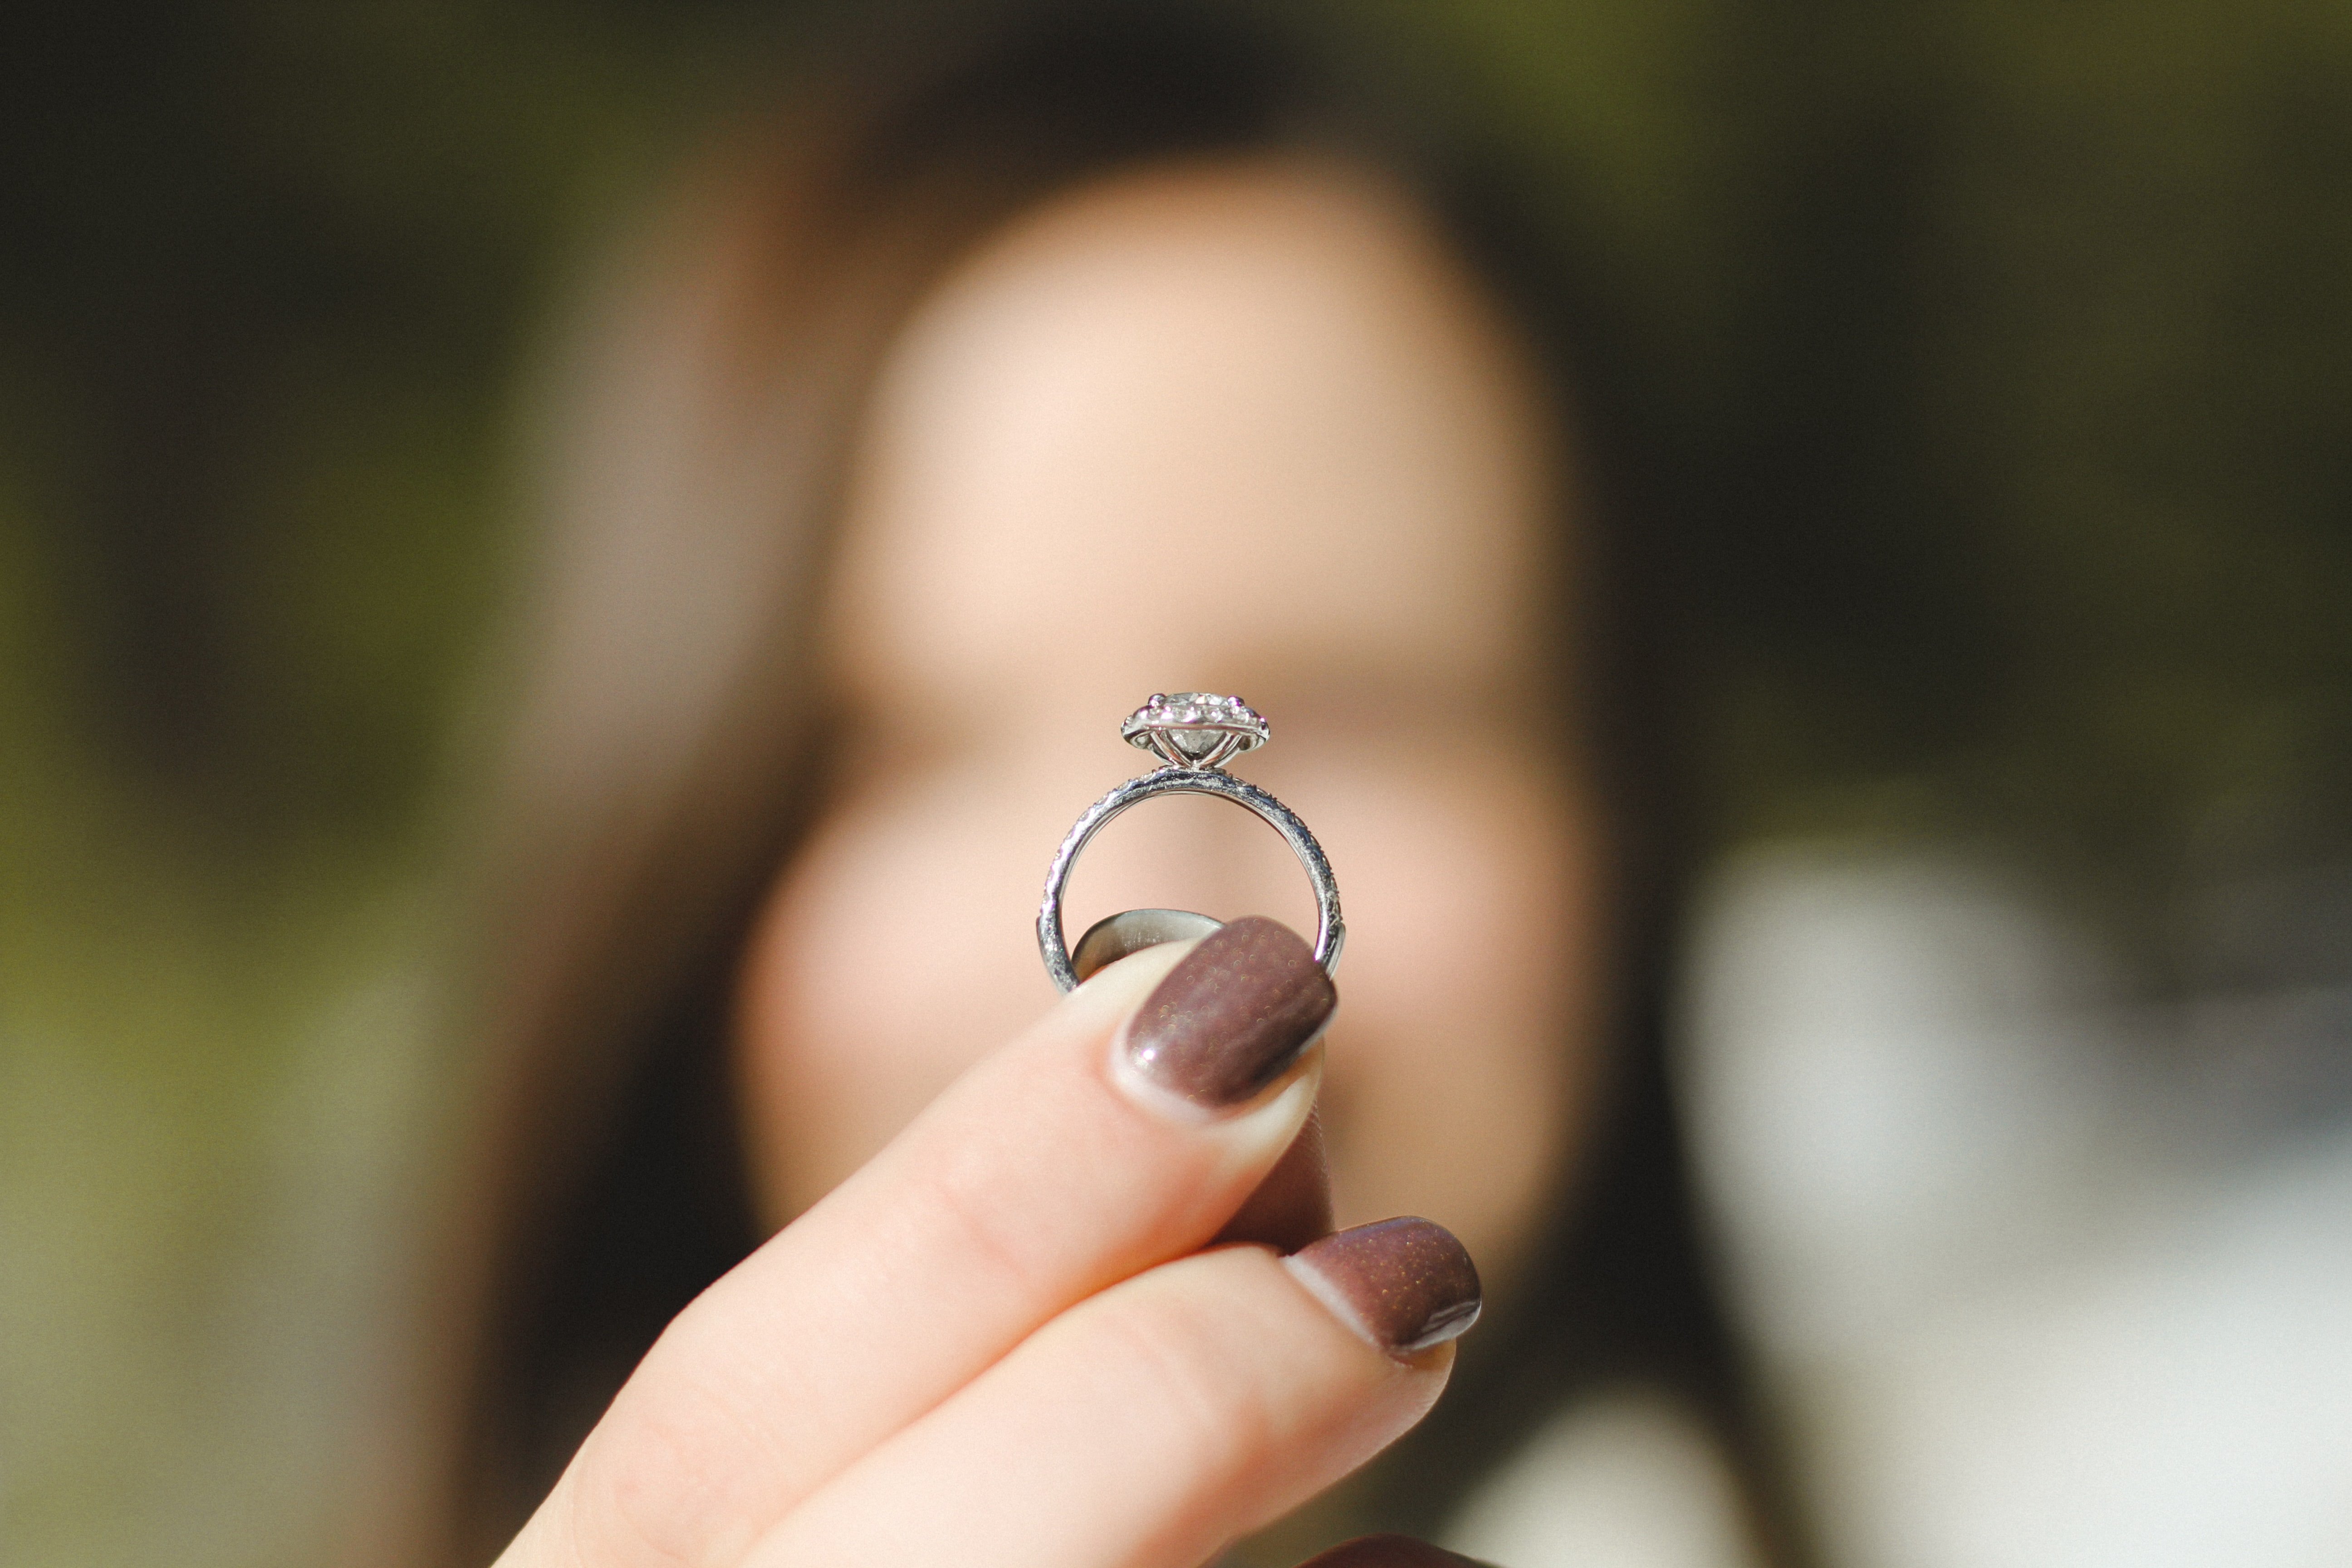 OP guessed Don could've asked her to pick the ring since her tastes matched her best friend's. | Source: Unsplash